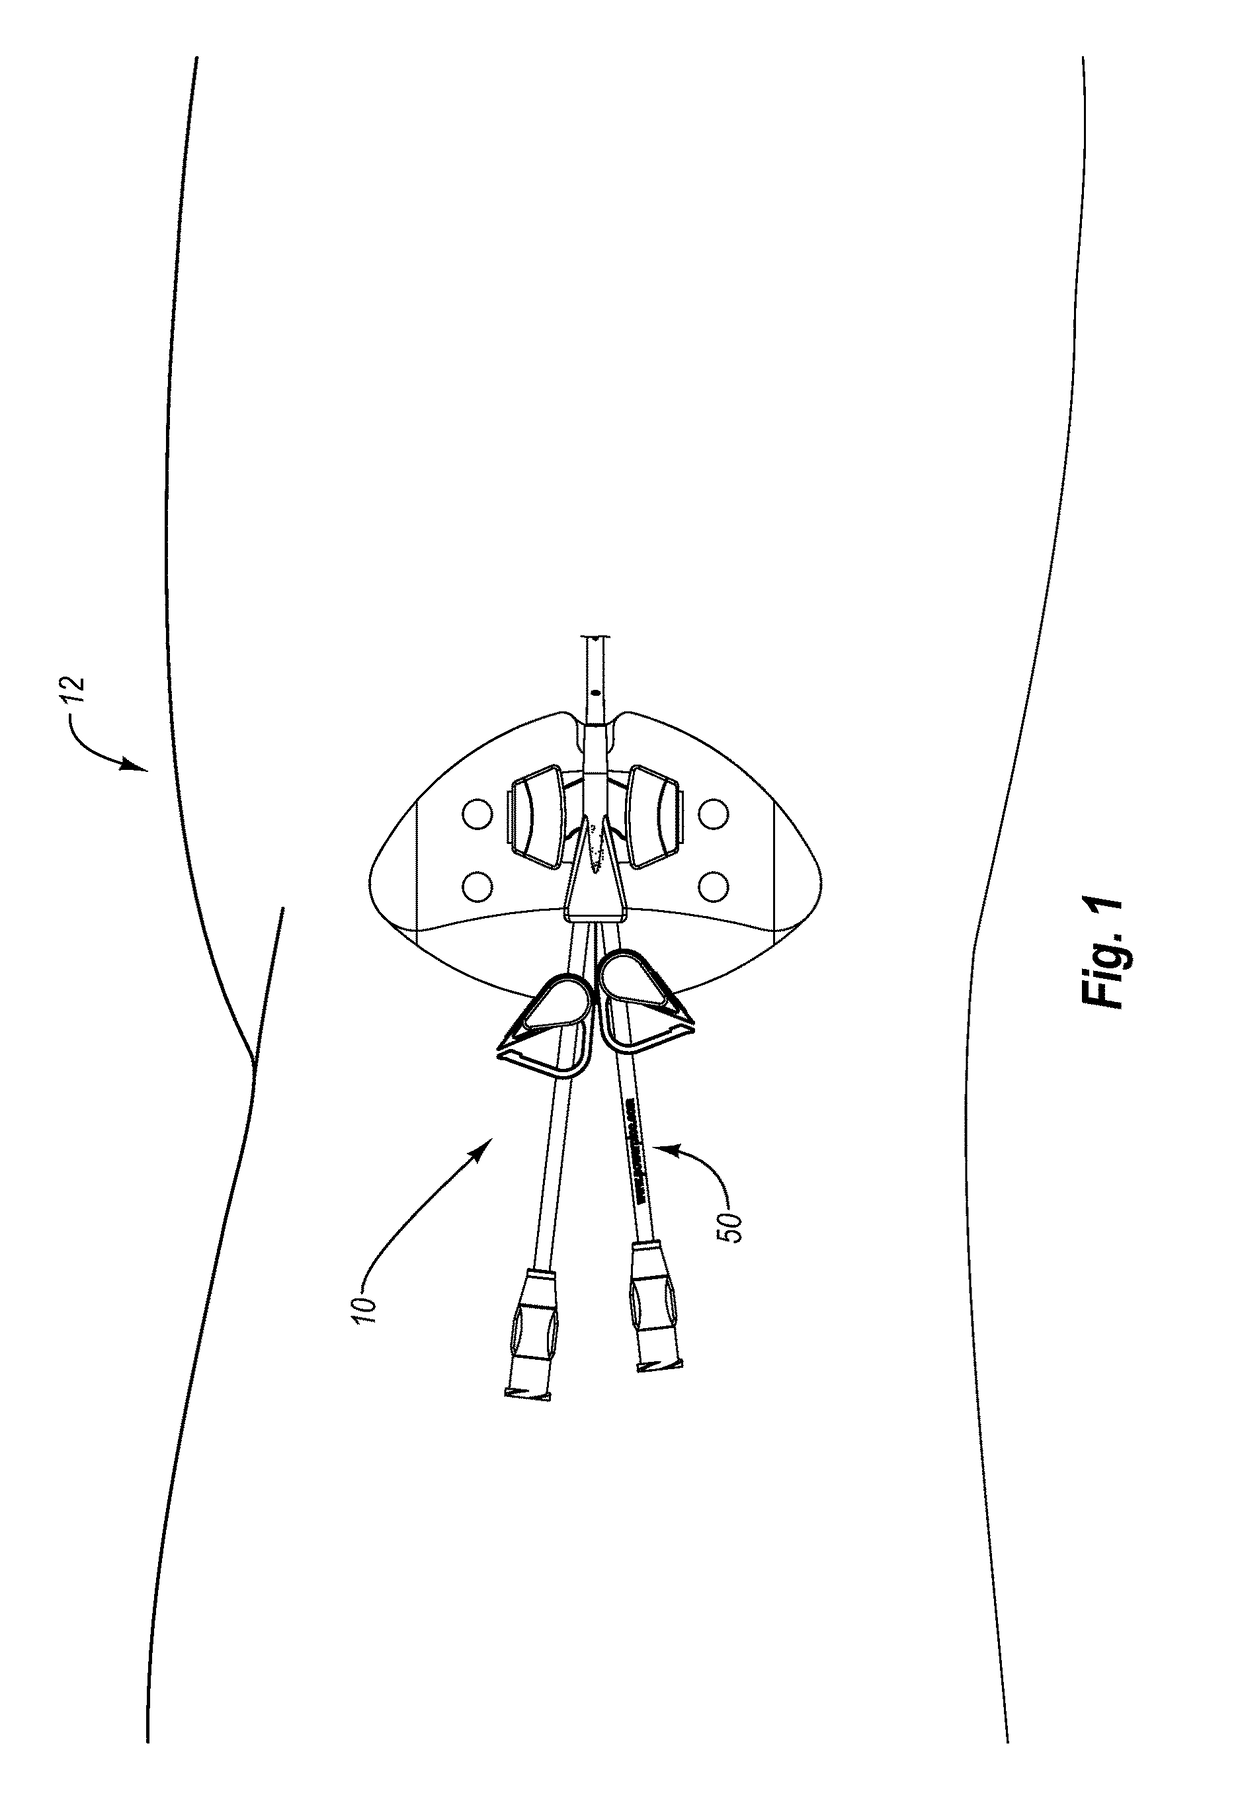 Resource information key for an insertable medical device